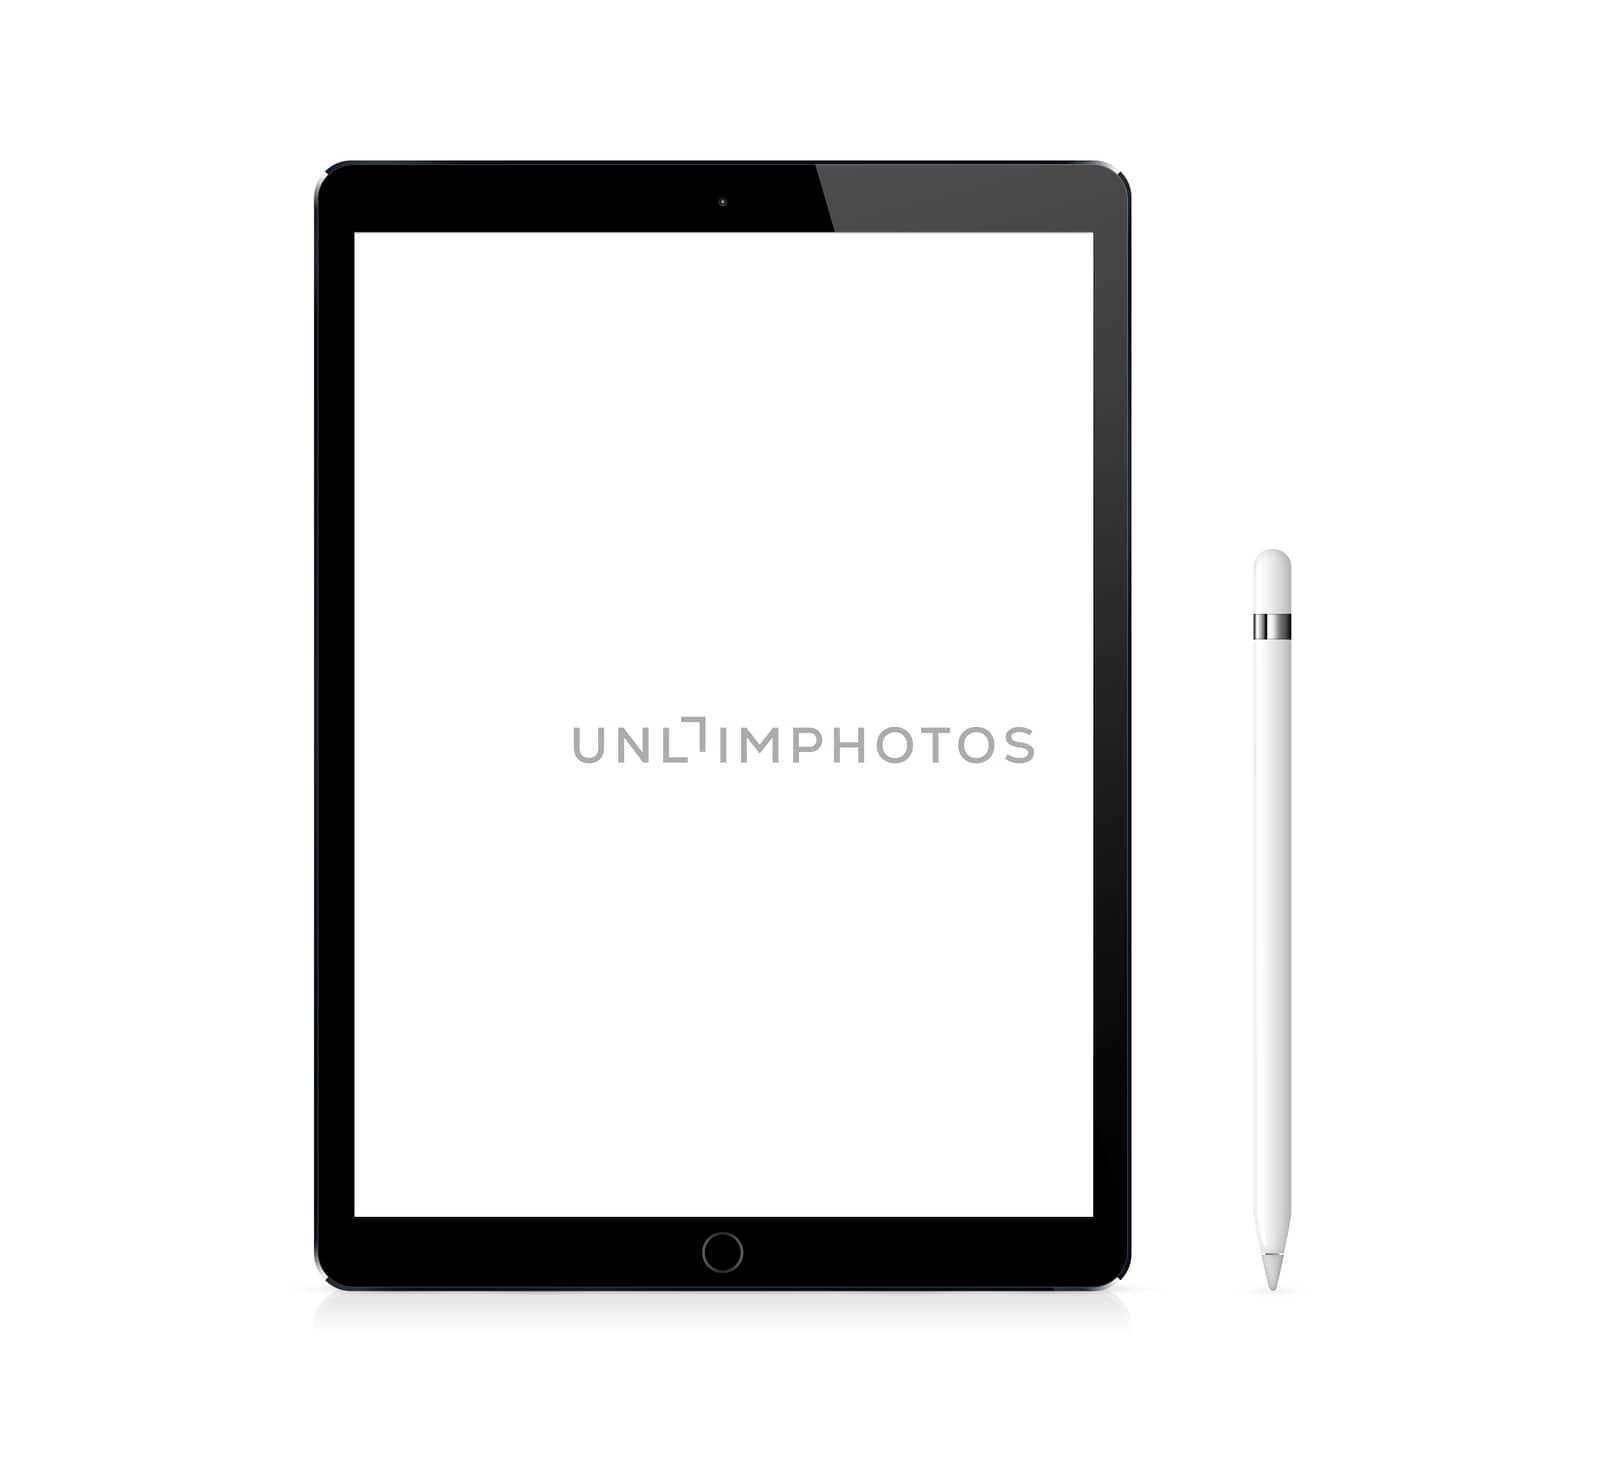 The black portable tablet device with stylus pen